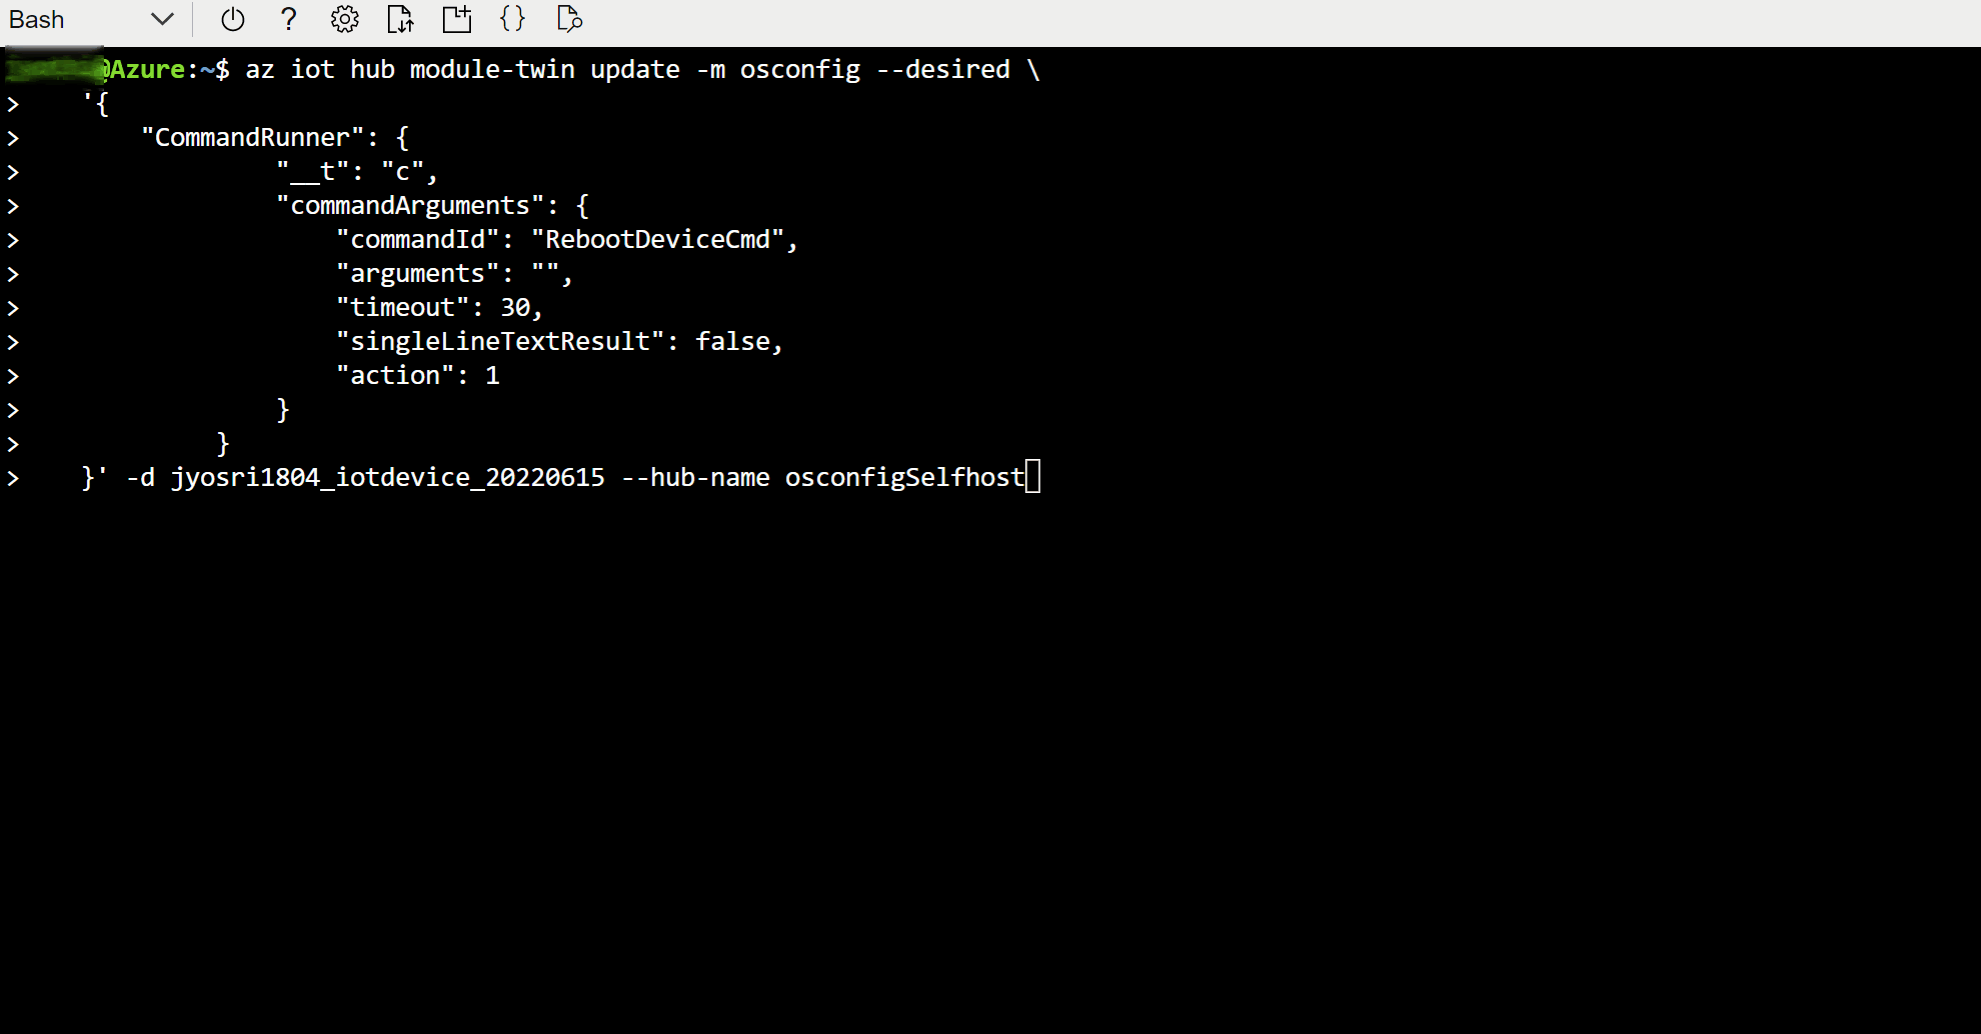 Screen capture showing how to reboot a device using bash.